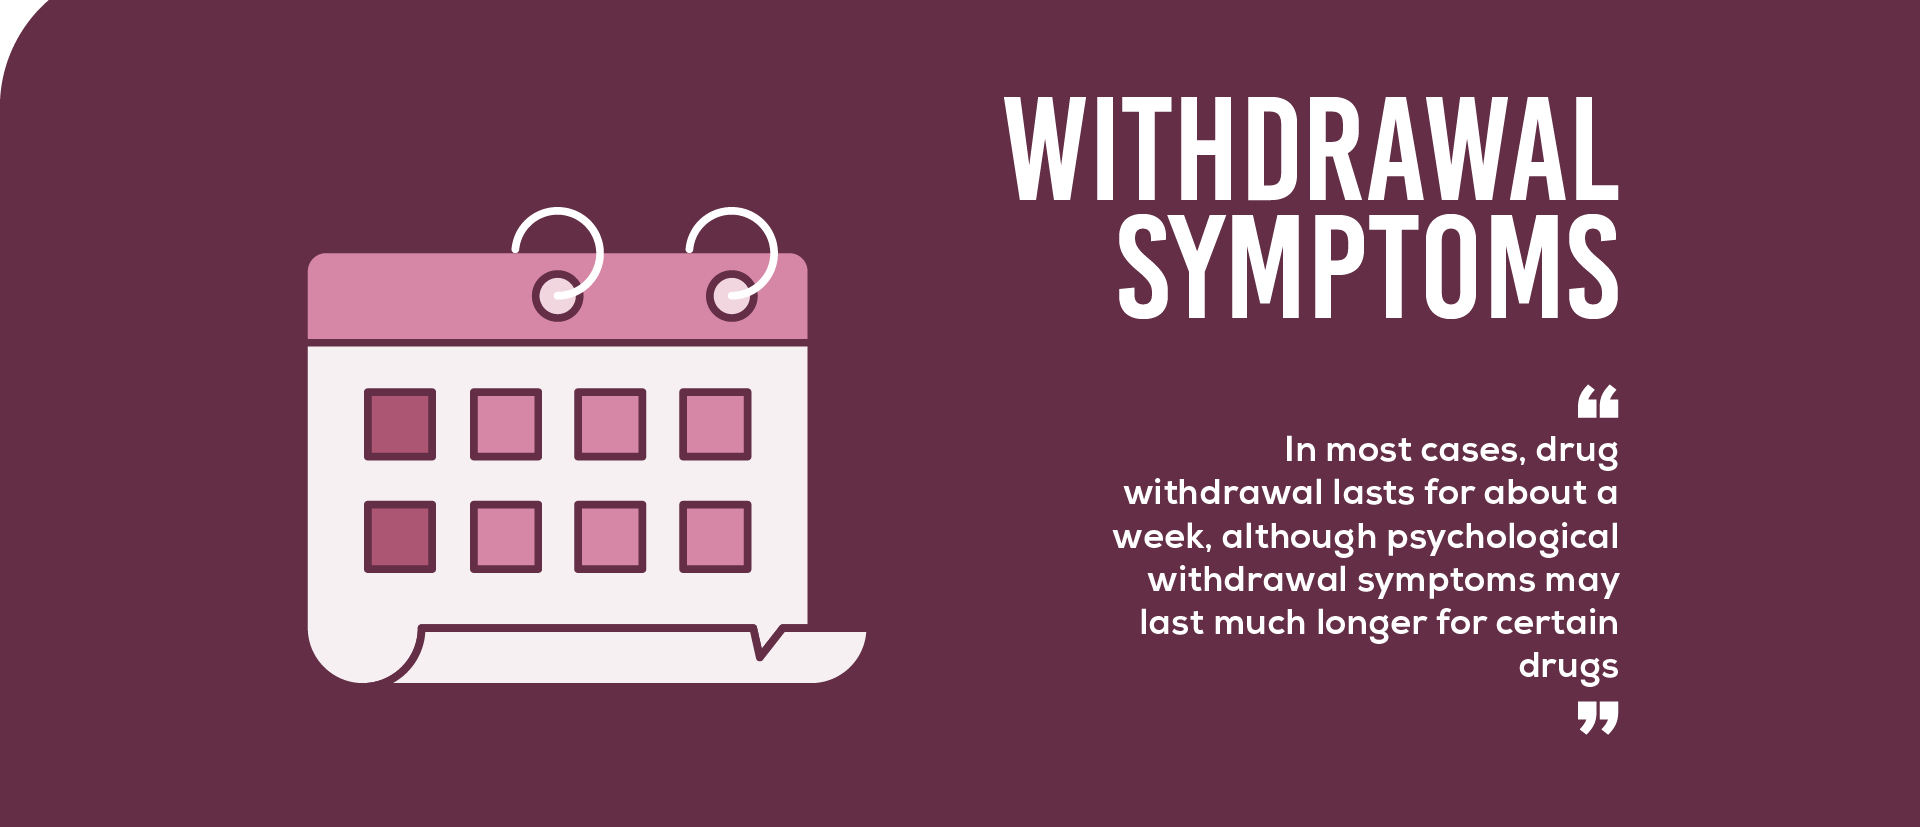 In most cases, drug withdrawal lasts for about a week, although psychological withdrawal symptoms may last much longer for certain drugs